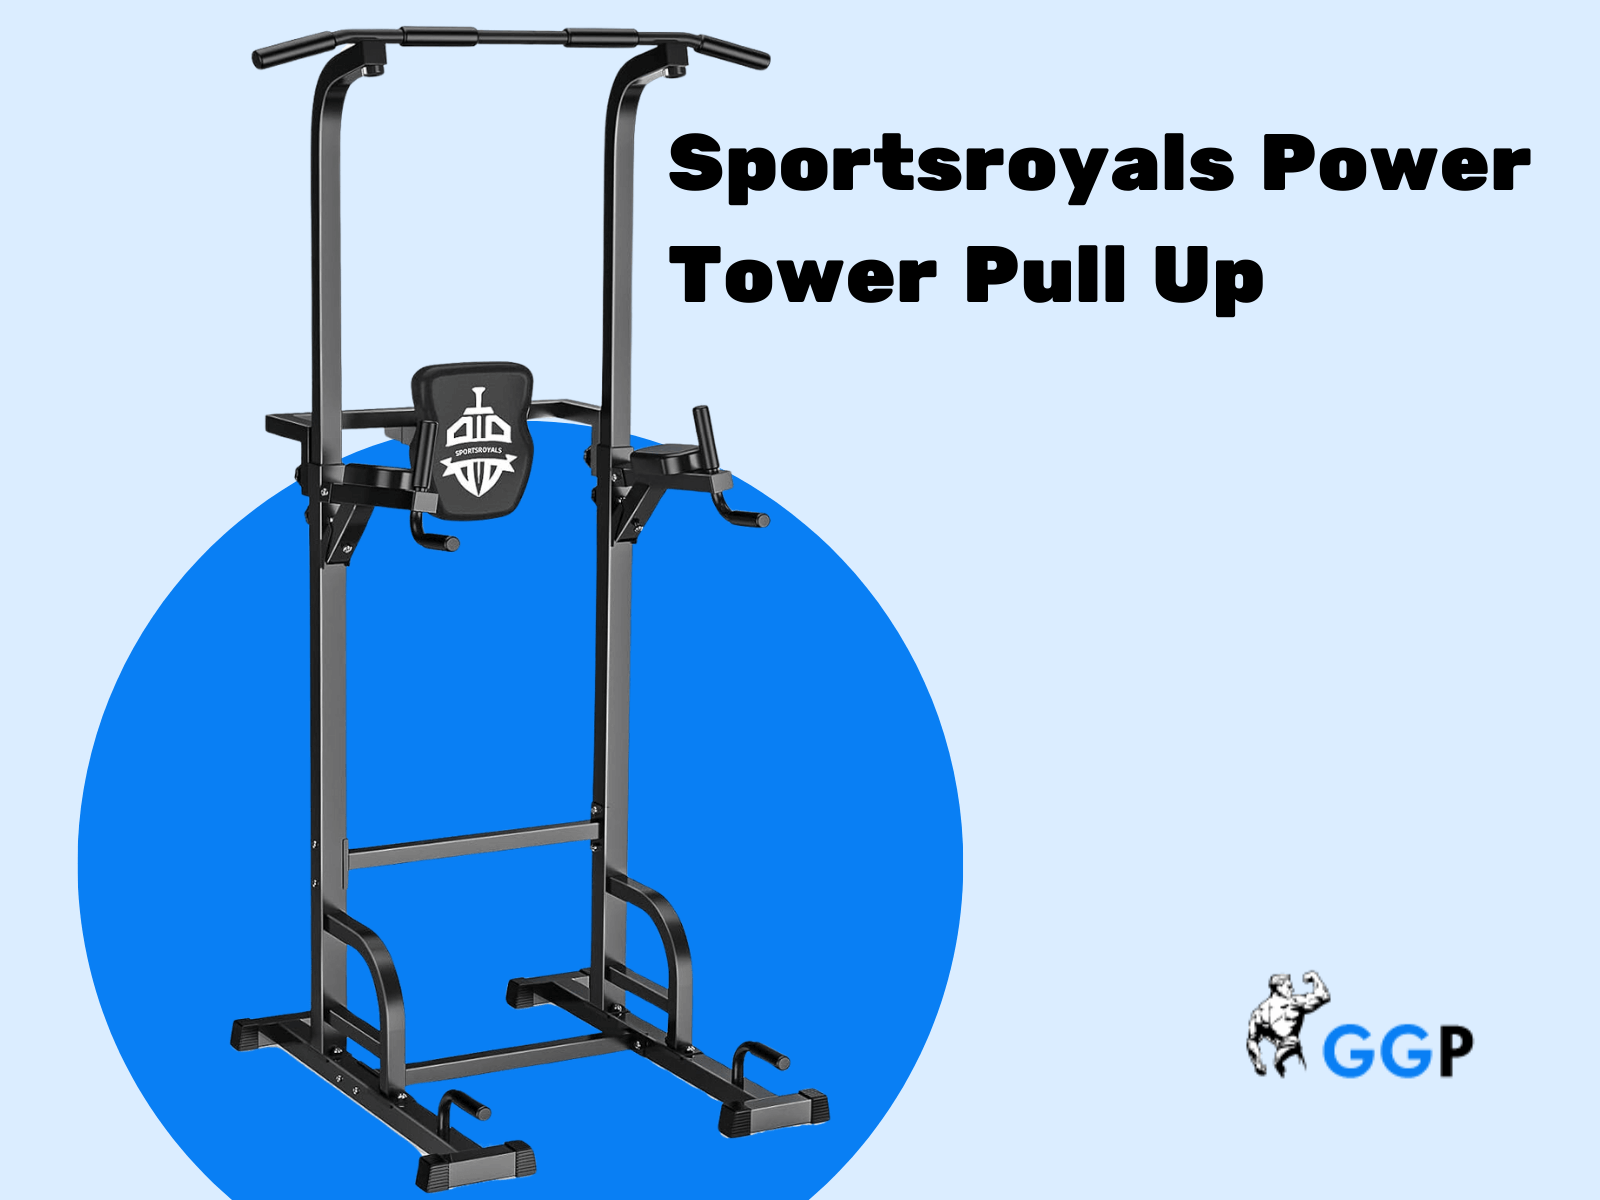 Sportsroyals power tower pull up